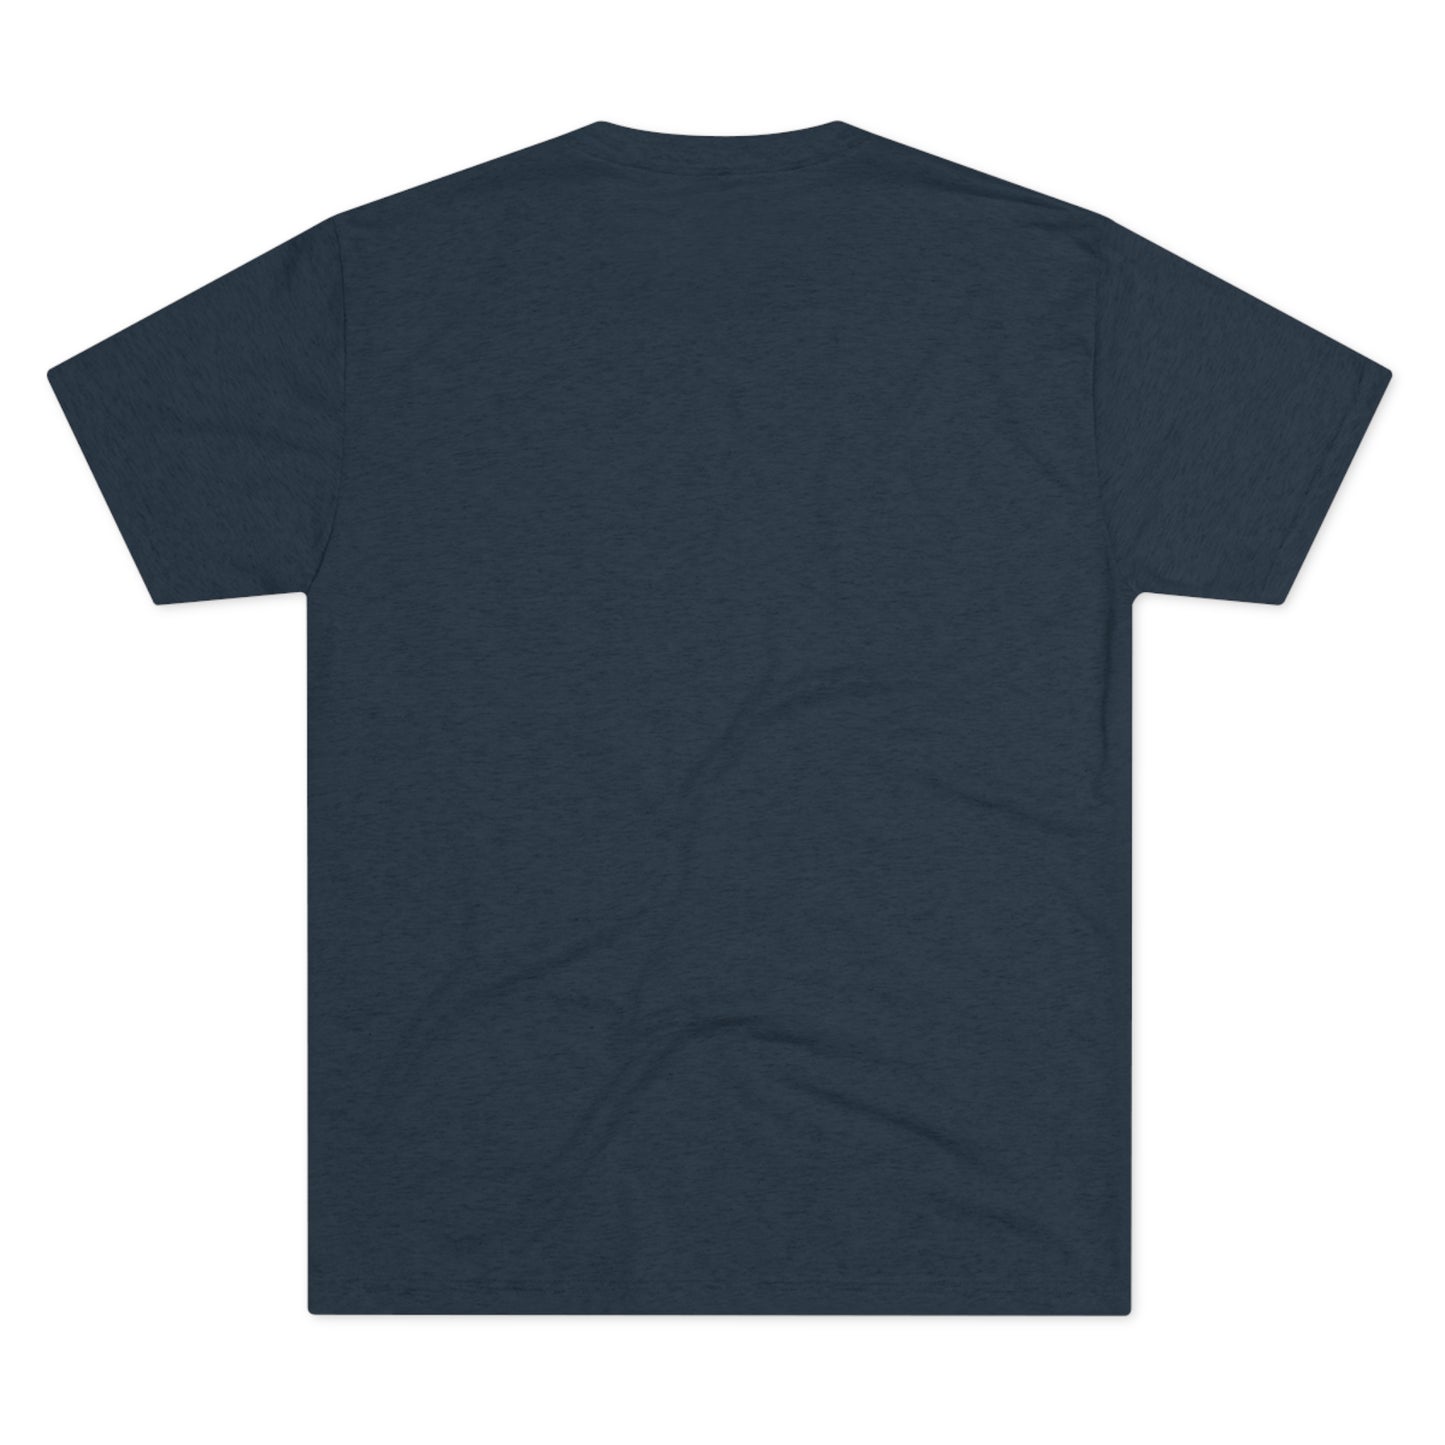 Plain navy blue Inhale Strength Exhale Doubt w Images - Unisex Tri-Blend Crew Tee by Printify displayed from the back on a white background. The shirt is smooth with no visible logos or designs. Ideal for workout apparel.